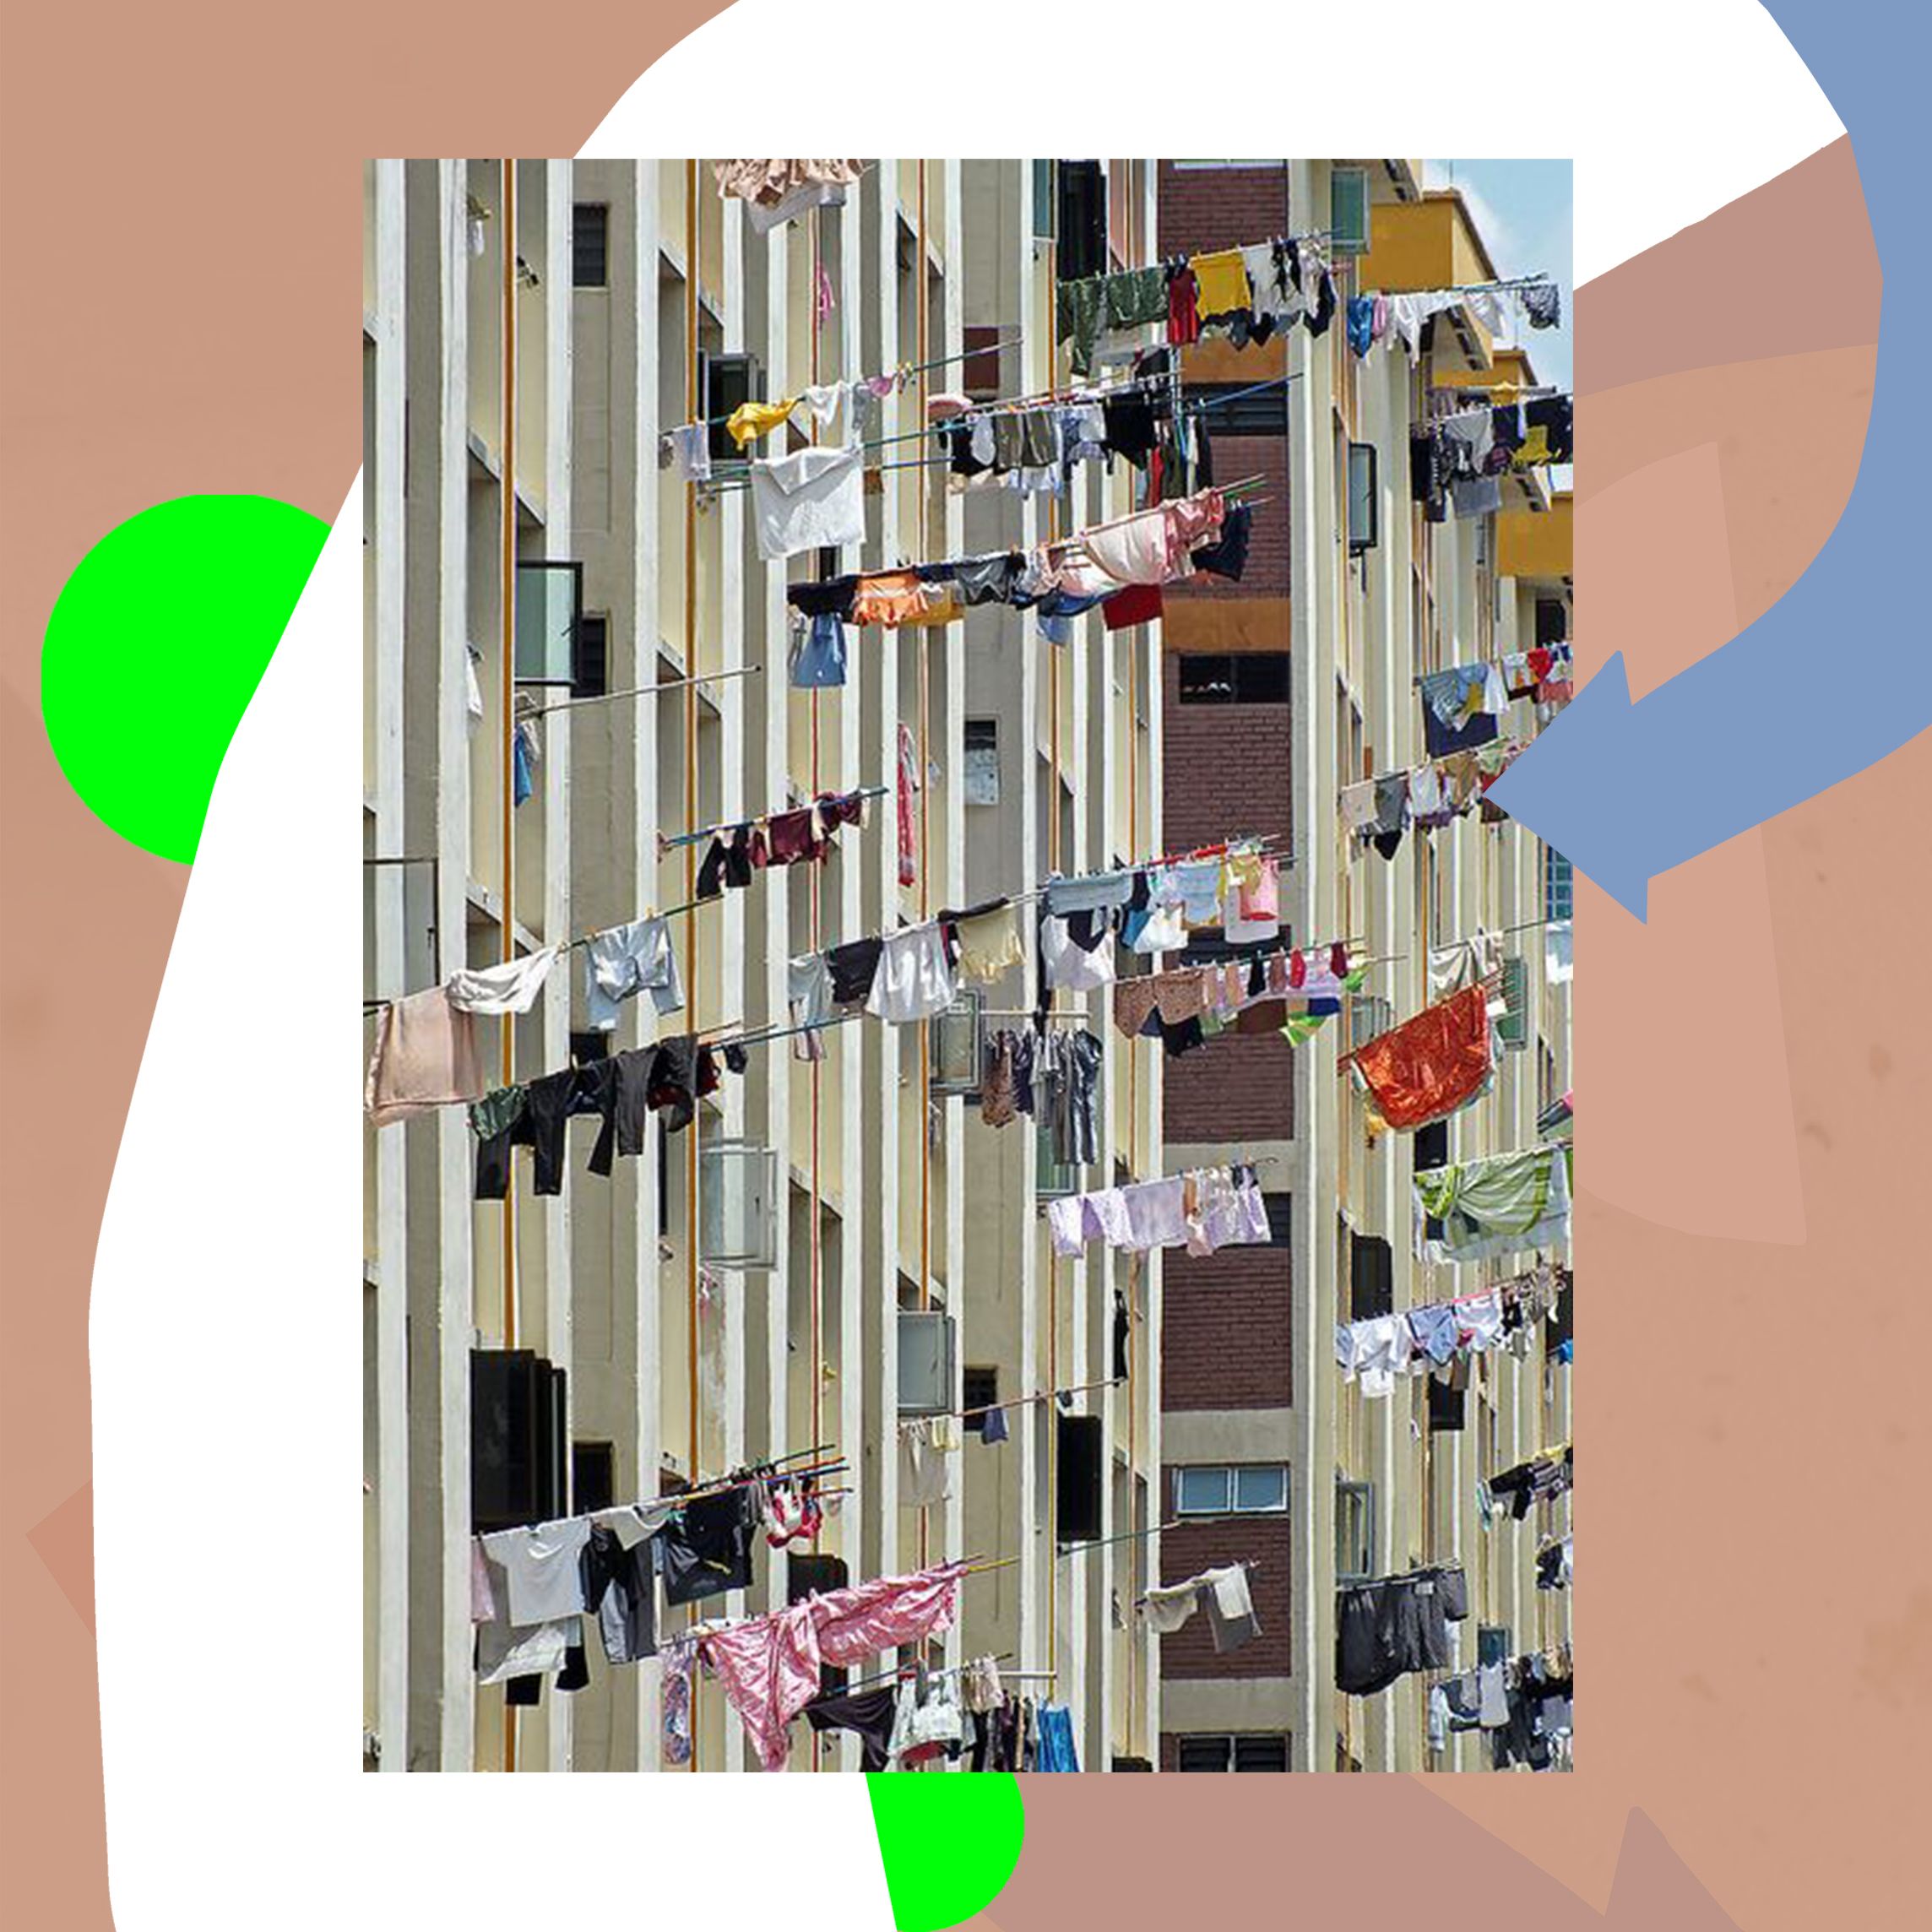 Lines of clothing hanging from apartment block windows on a graphic background